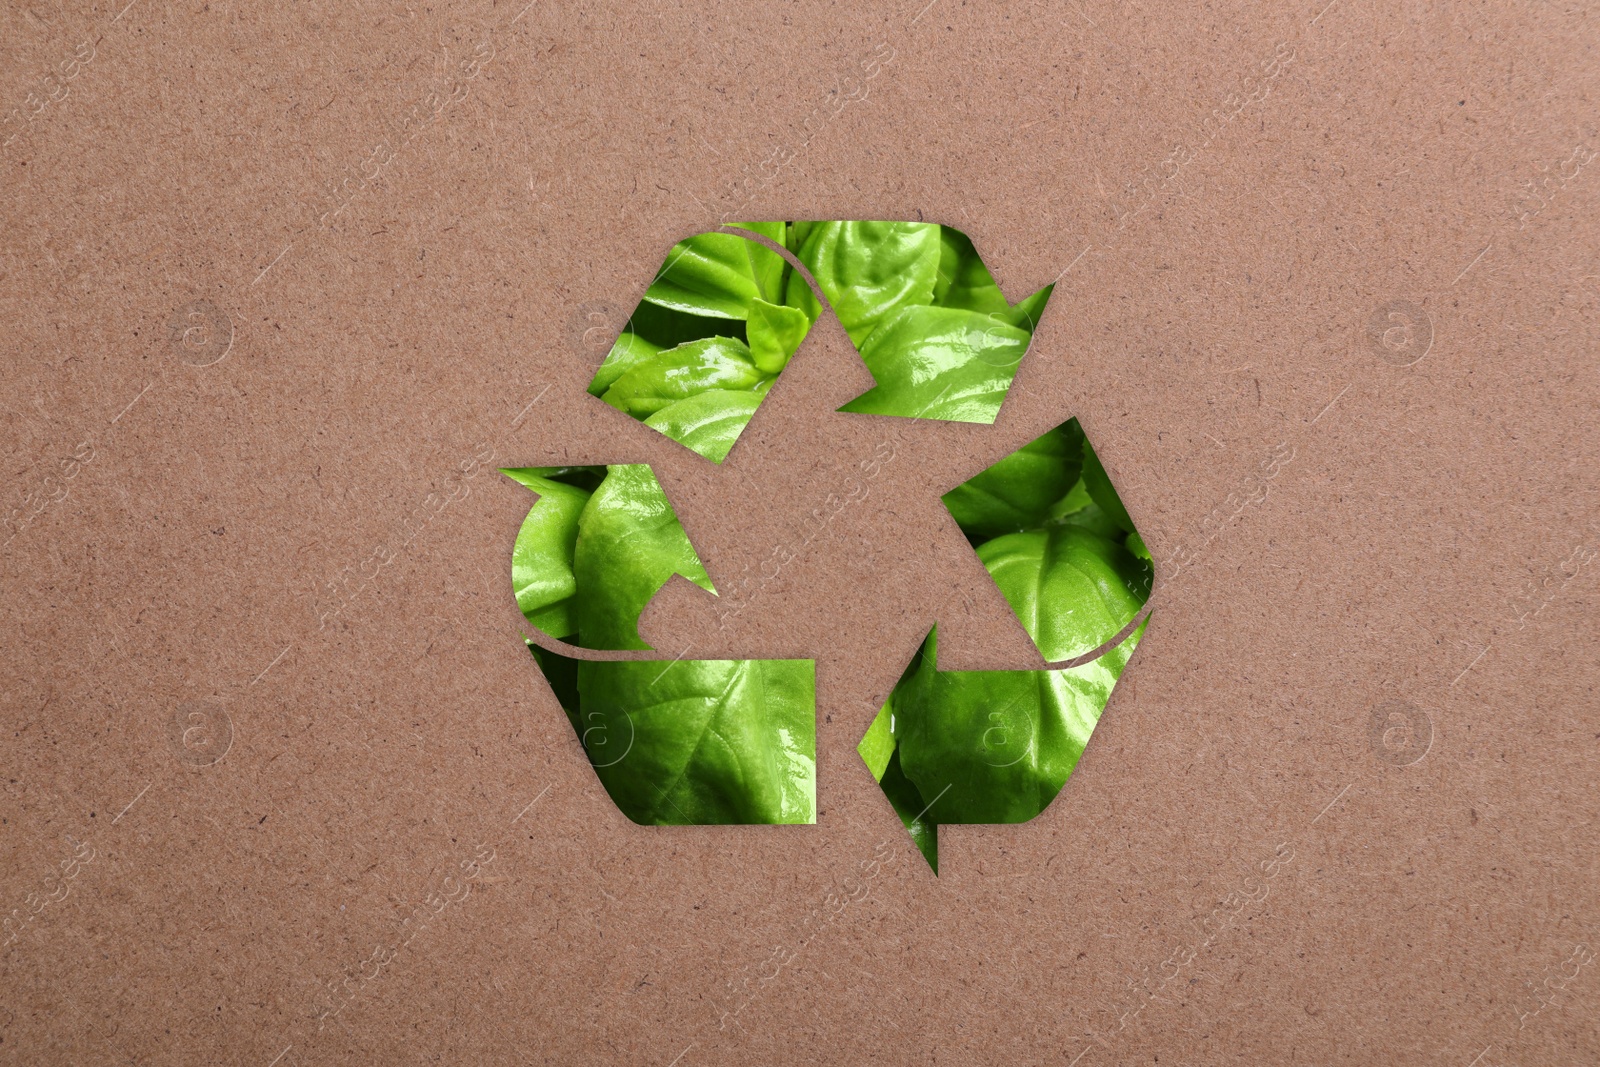 Image of Recycling symbol made of green leaves on kraft paper